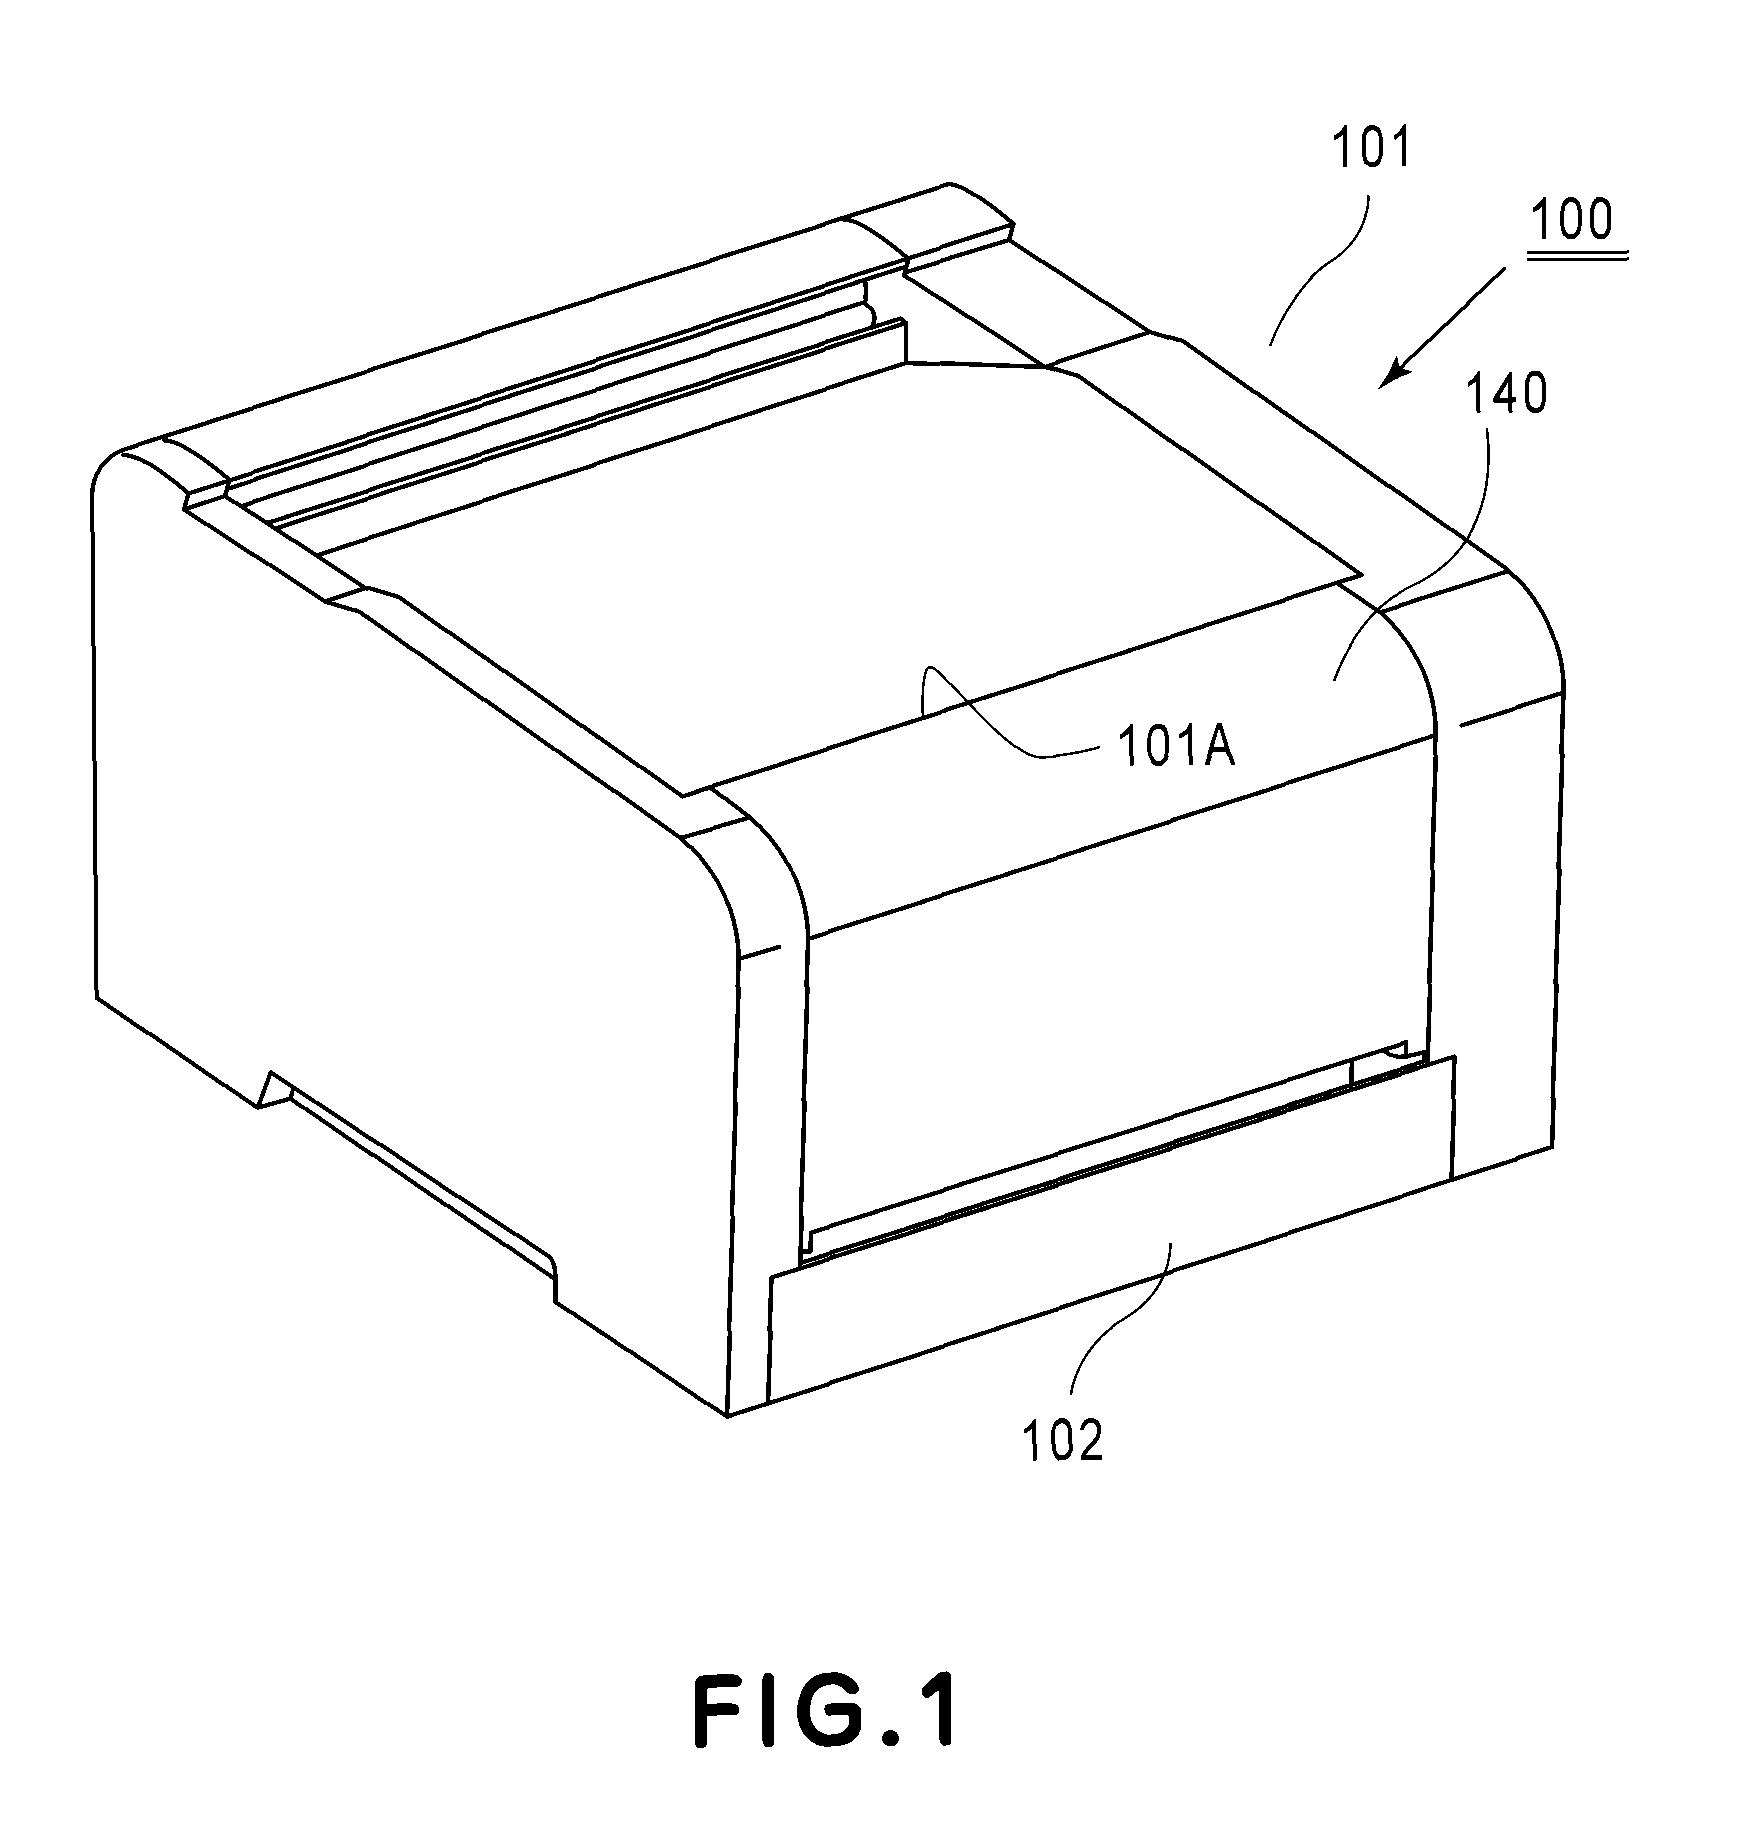 Image forming apparatus with cartridge supporting movable member